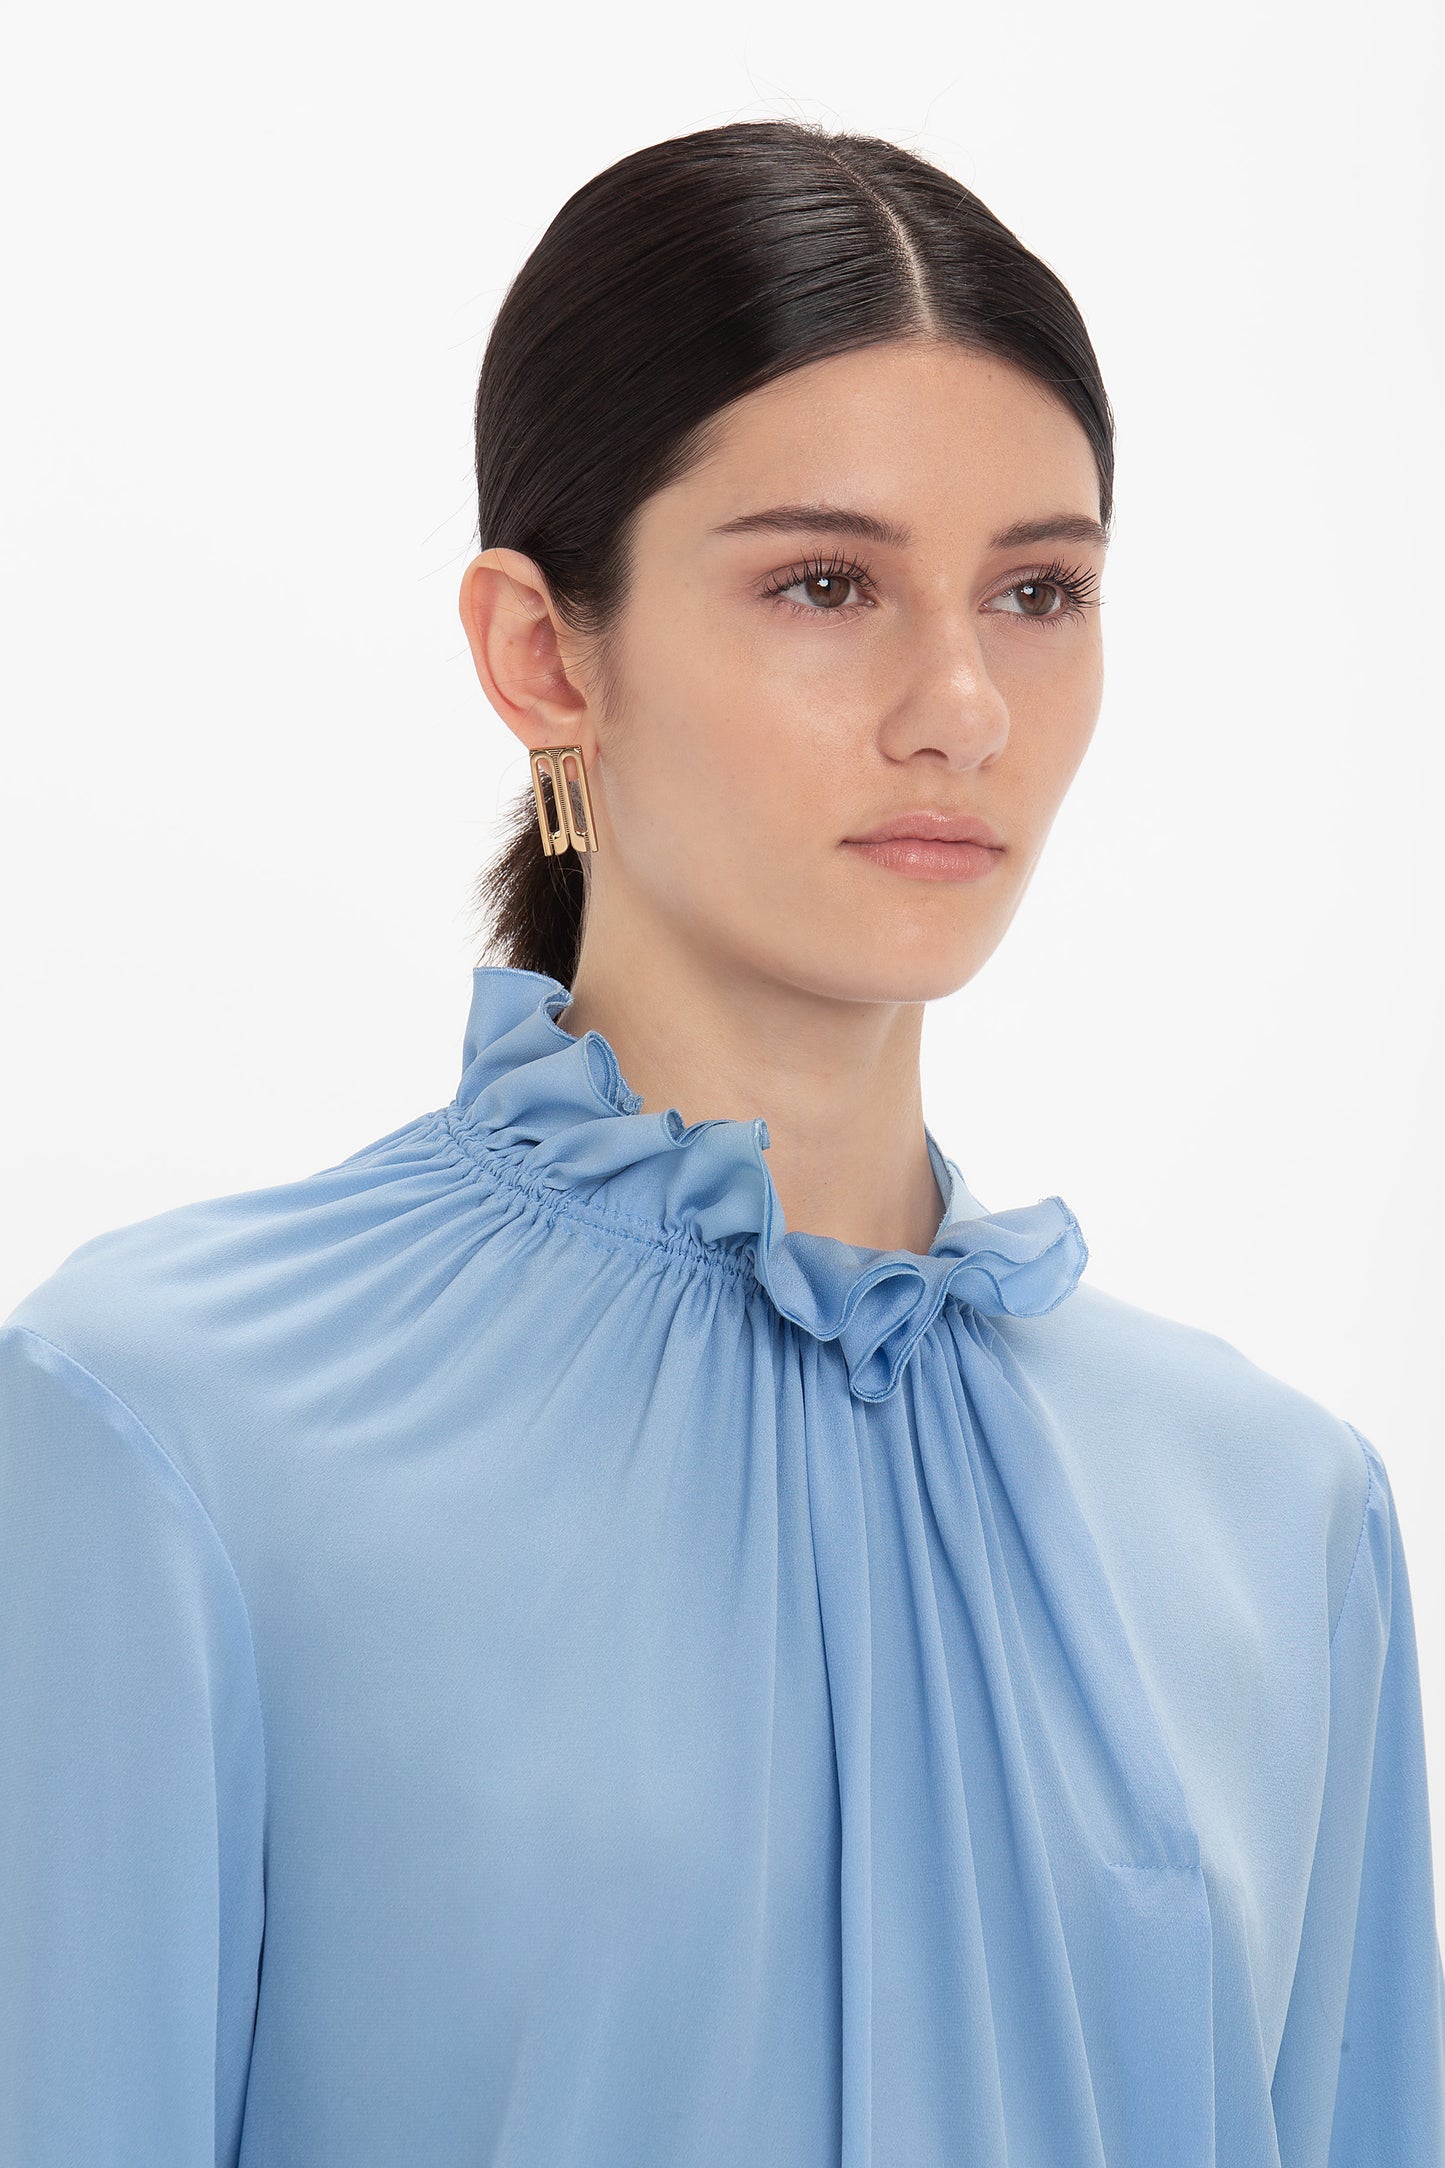 A person with long dark hair tied back wearing a light blue, crepe de chine Exclusive Ruffle Neck Blouse In Cornflower Blue by Victoria Beckham and gold earrings shaped like rectangles. The background is plain white.